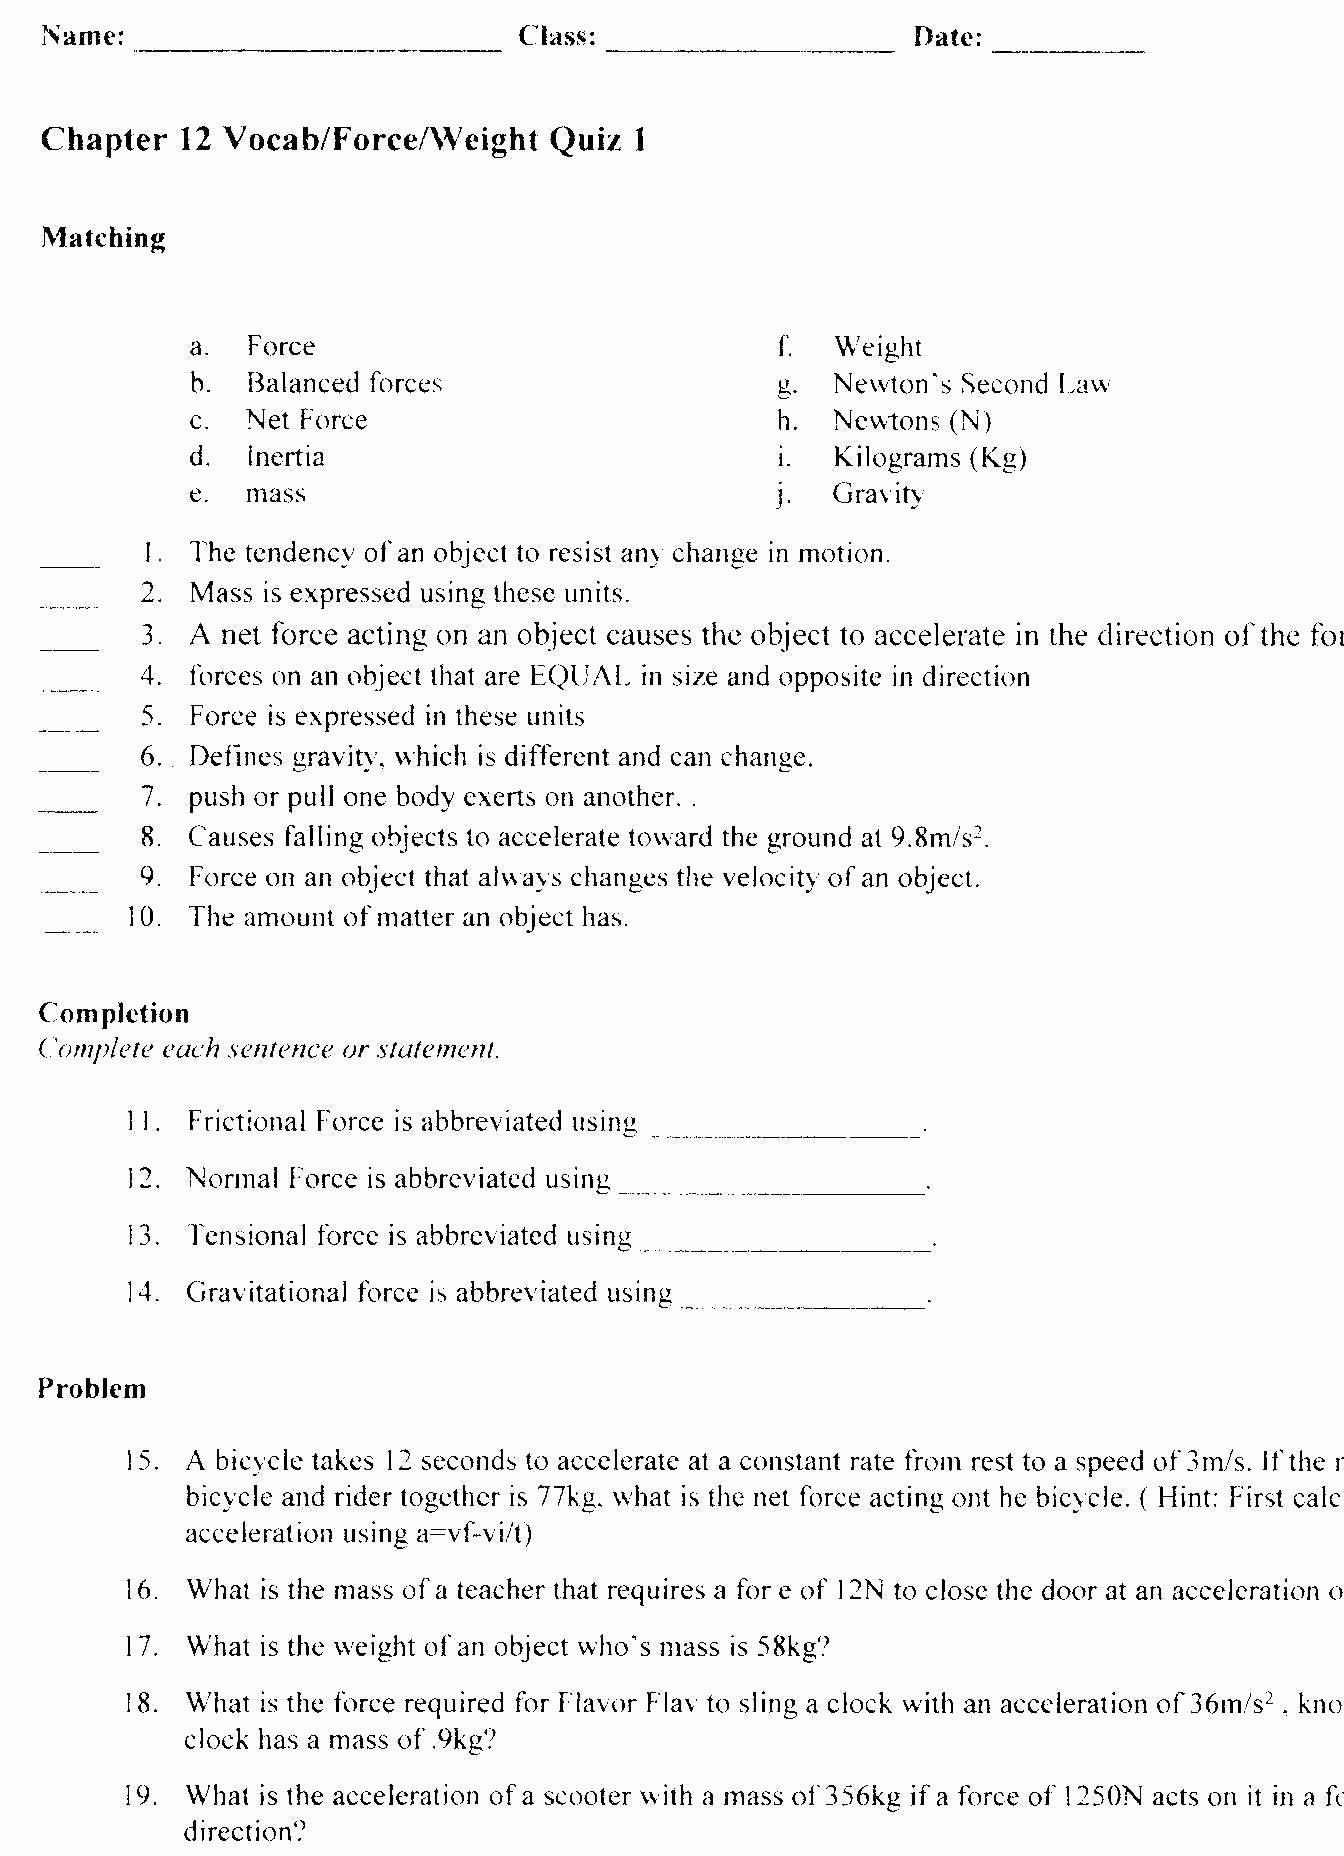 Work Power Energy Worksheet Awesome Work Energy and Power Worksheet Answers Physics Classroom